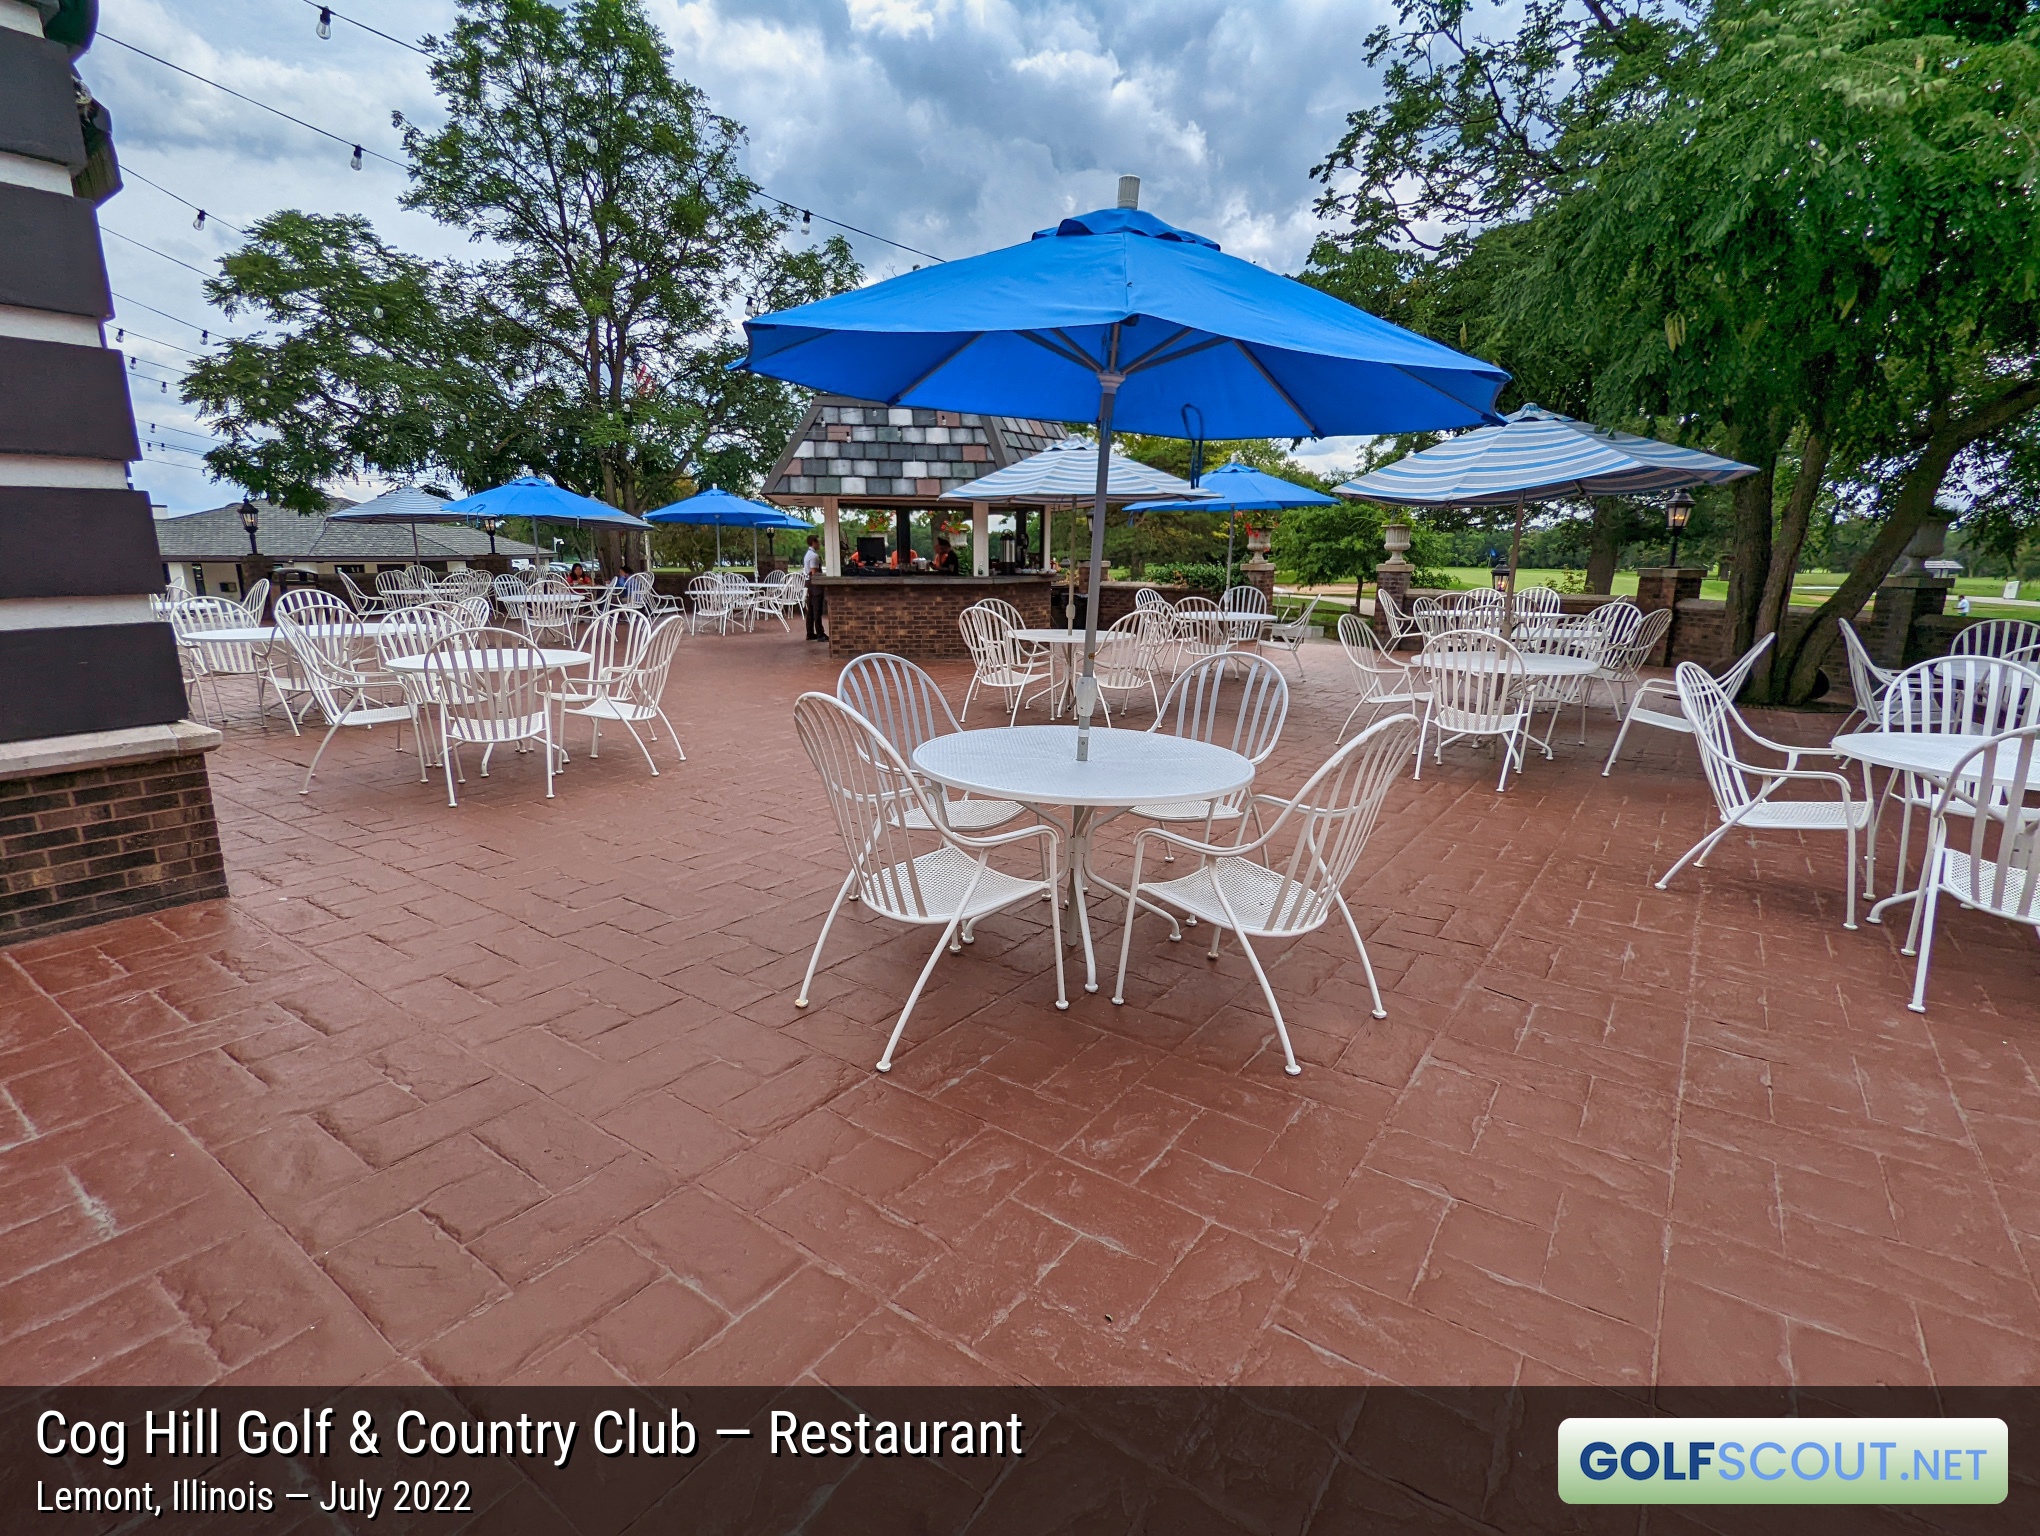 Photo of the restaurant at Cog Hill Course #3 in Lemont, Illinois. The outdoor patio.